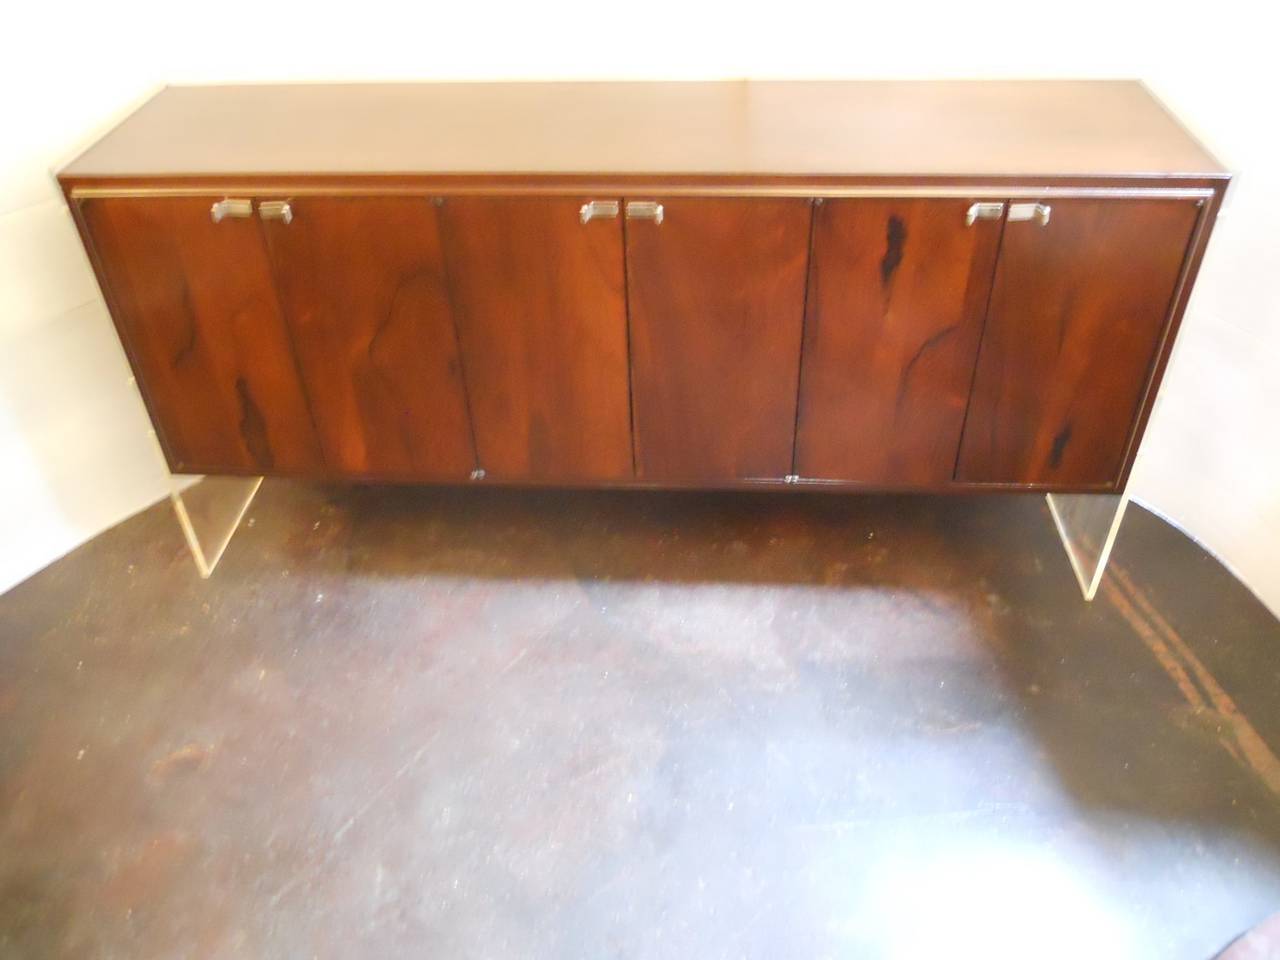 Modern credenza by Flair, Inc.
Material: Rosewood, walnut, acrylic, aluminum.